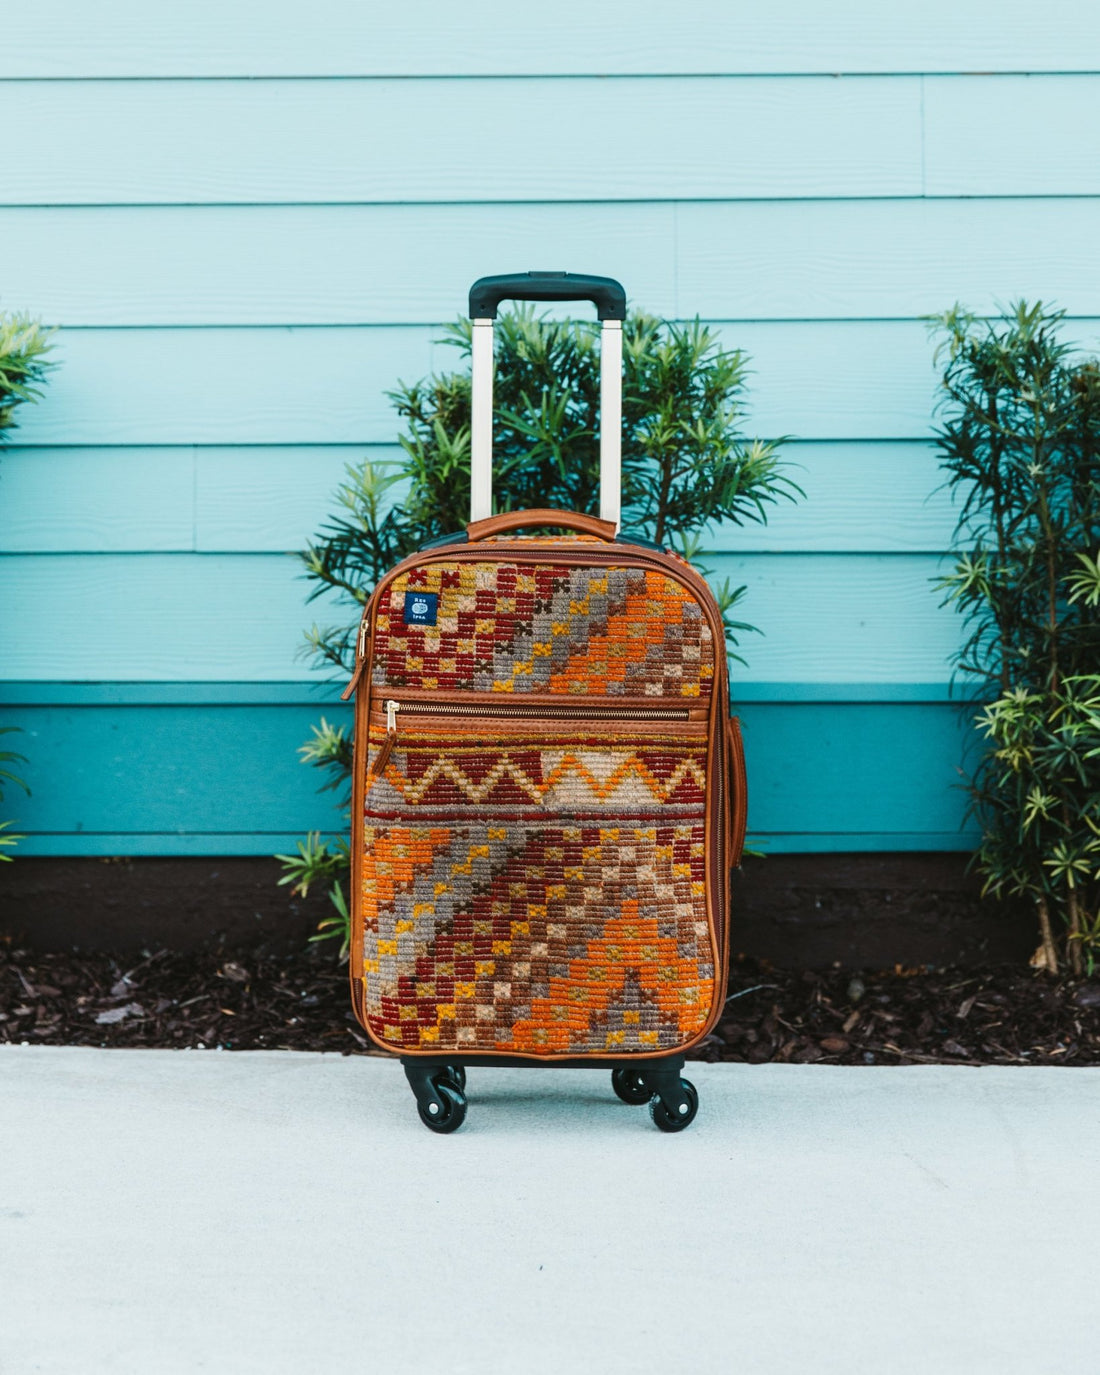 Keep Calm and Carry-On: How to Travel with Less | Res Ipsa - RES IPSA